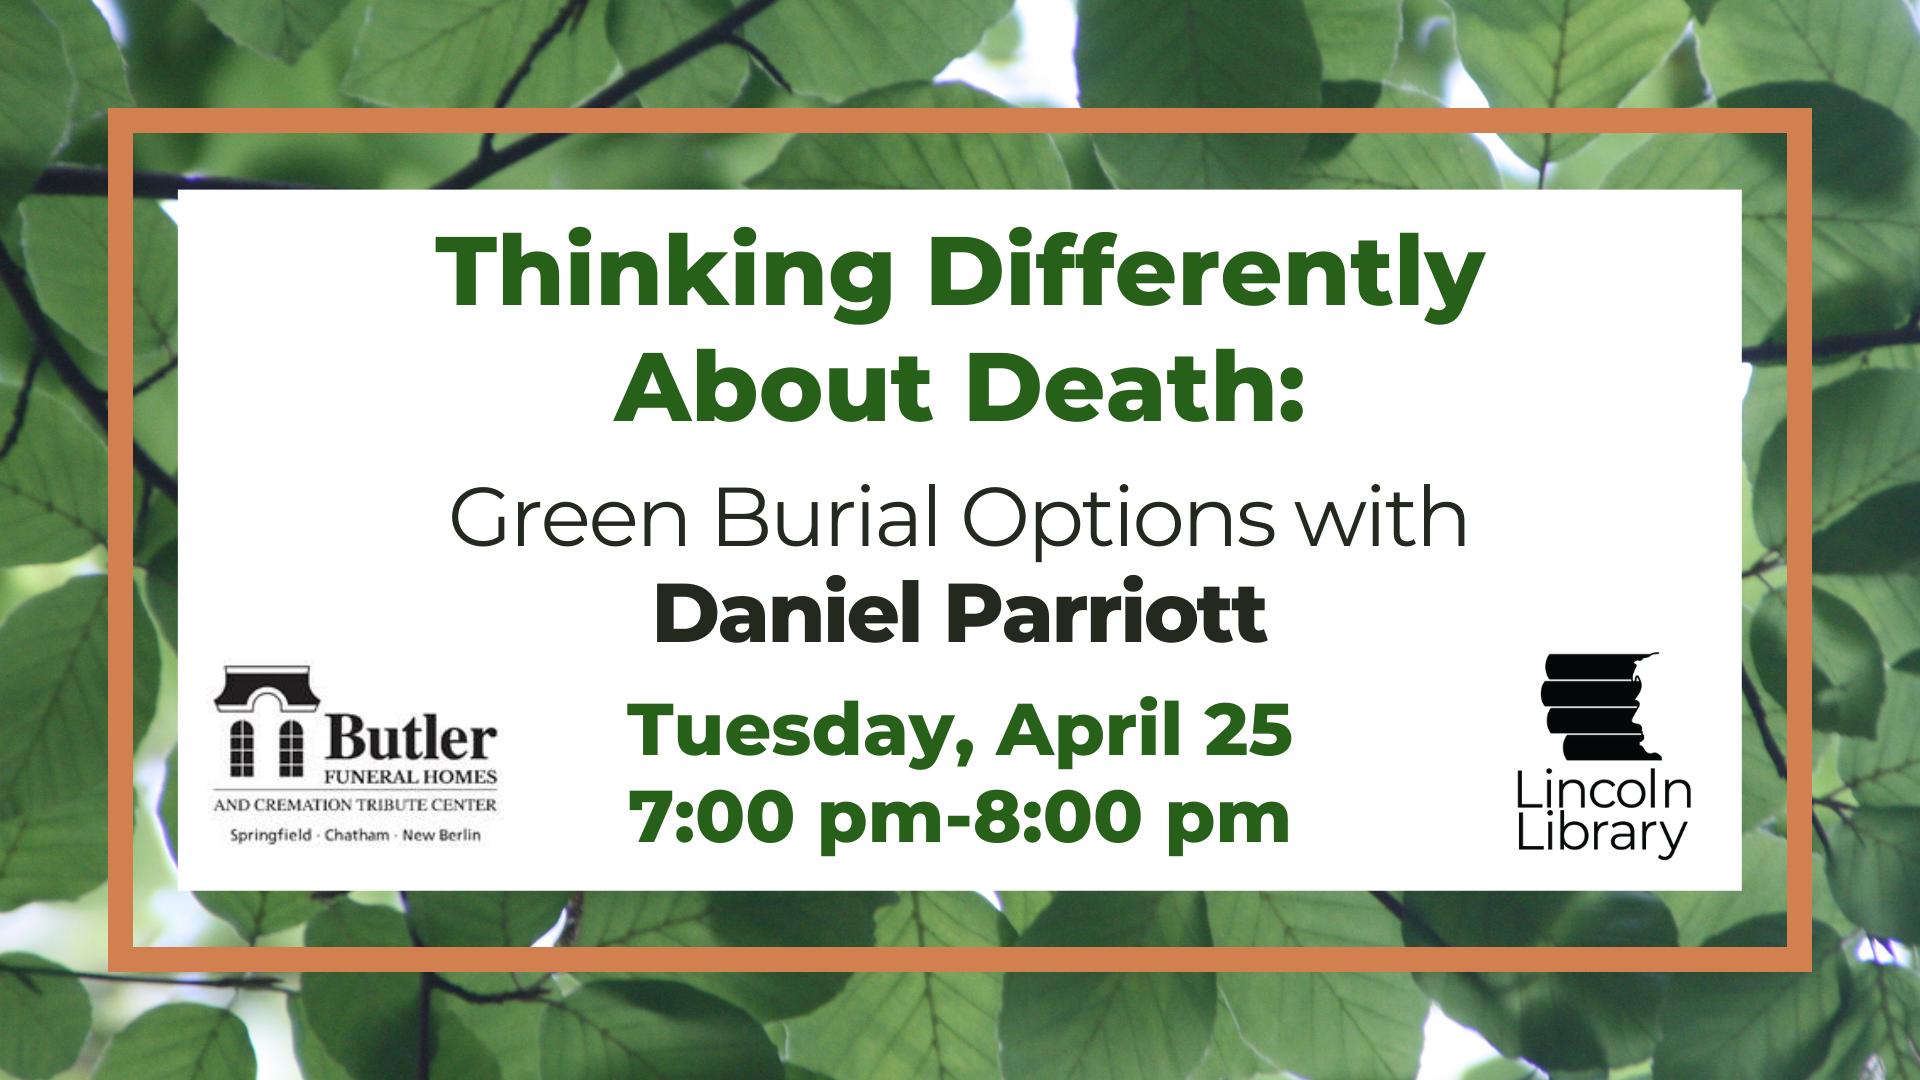 "Thinking Differently About Death: Green Burial Options"